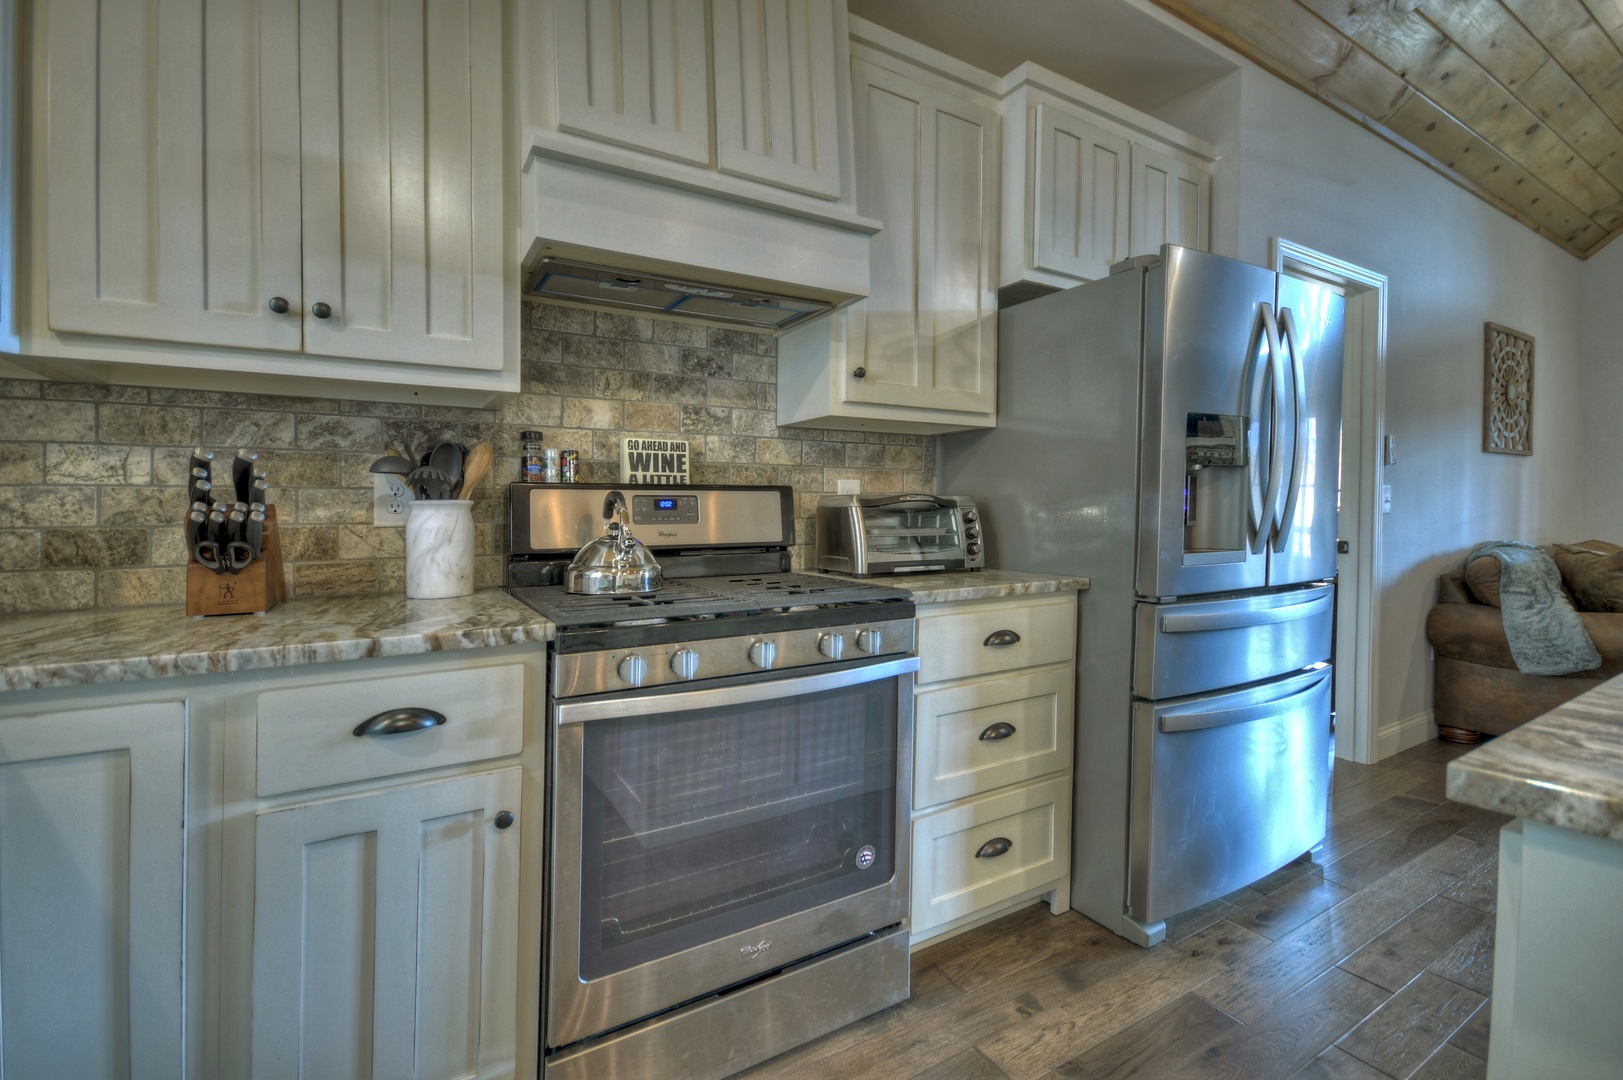 Serenity Now - Stainless Steel Appliances